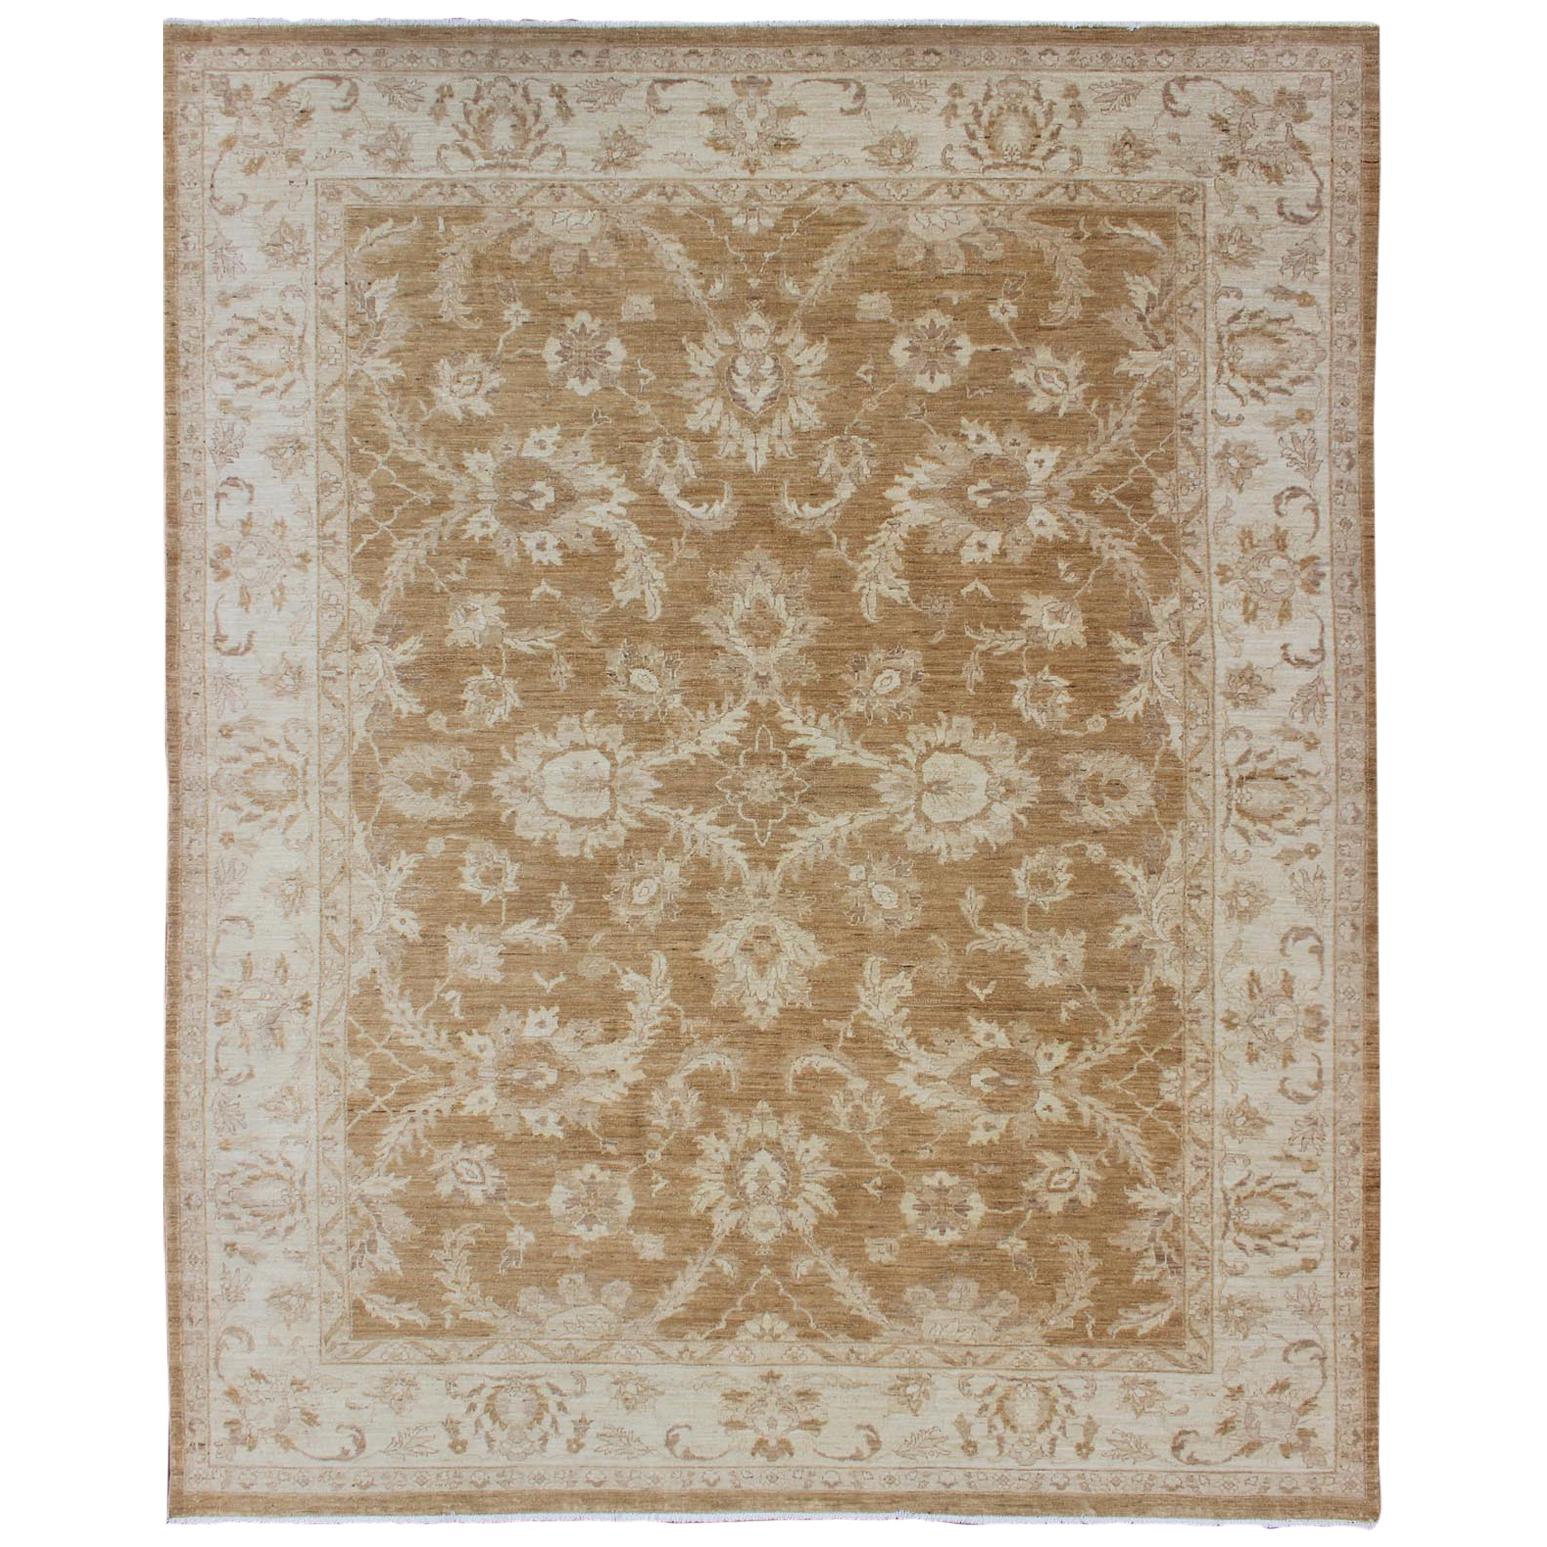 Sultanabad Design Afghan Made Floral Pattern in Earth Tones with Light Caramel